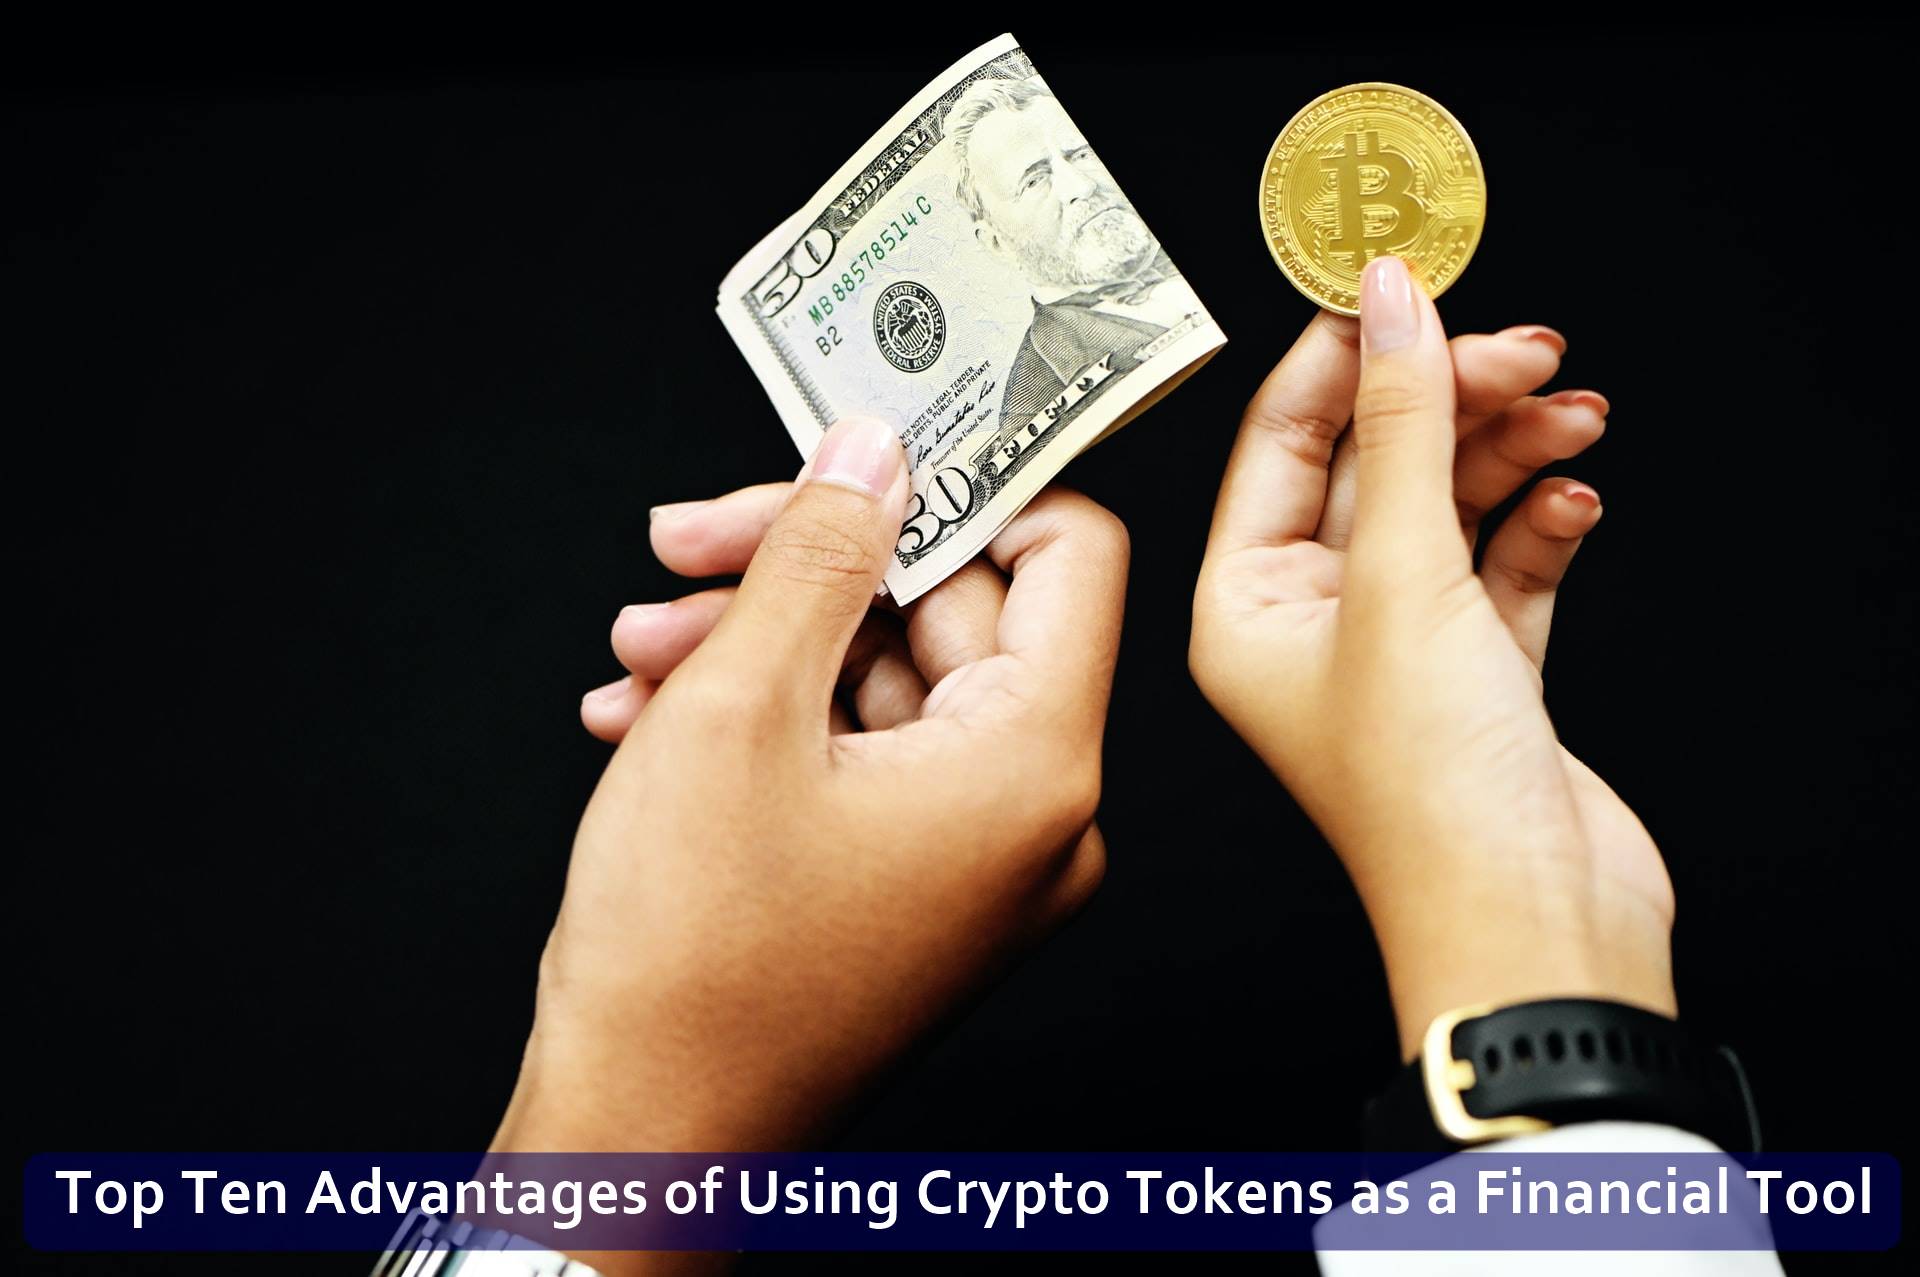 Top Ten Advantages of Using Crypto Tokens as a Financial Tool